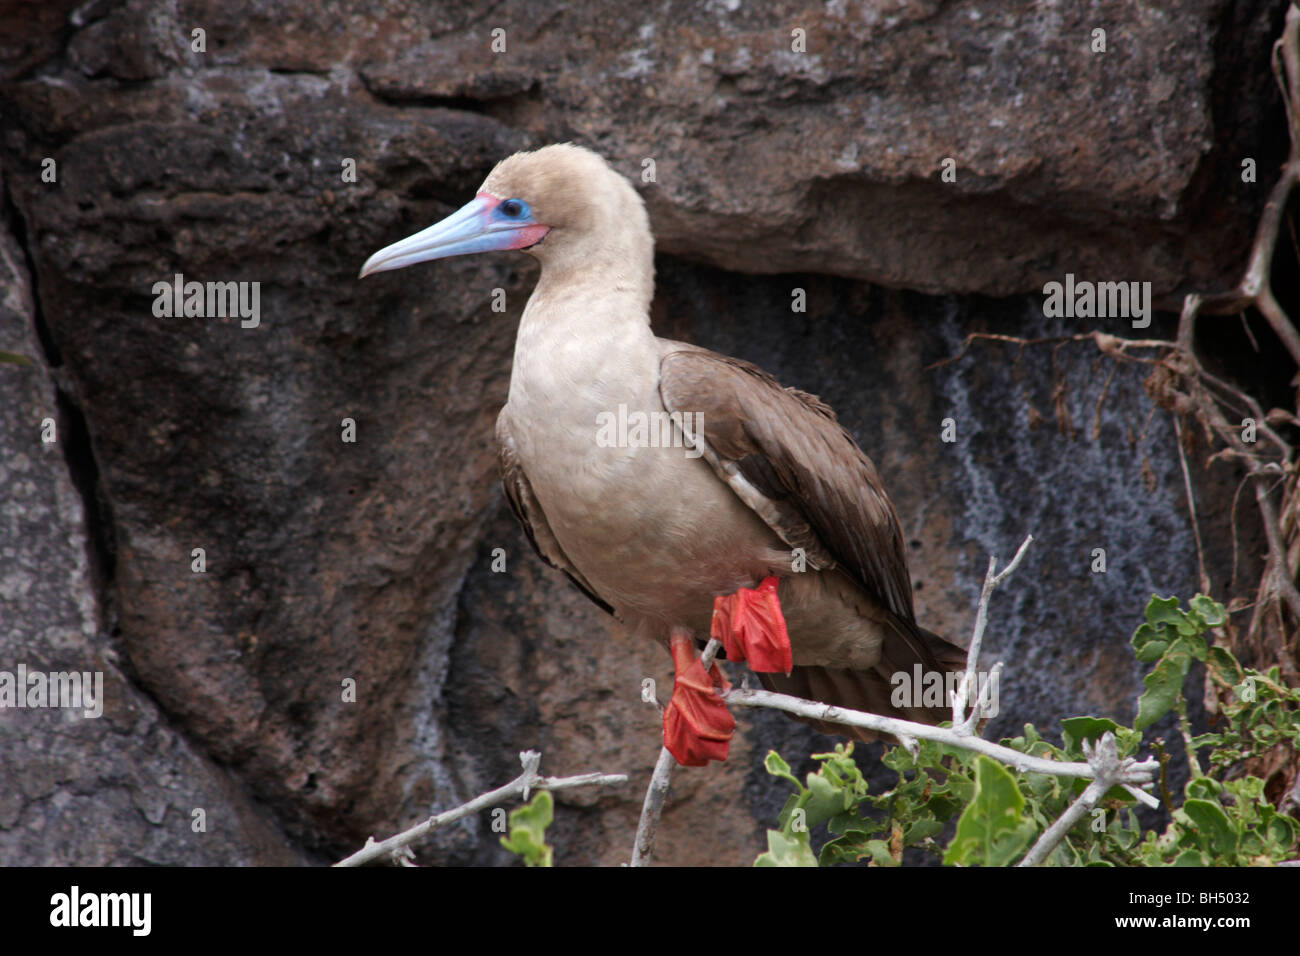 Red footed booby (Sula sula websteri) standing on branch at Darwin Bay Beach, Genovesa Island. Stock Photo